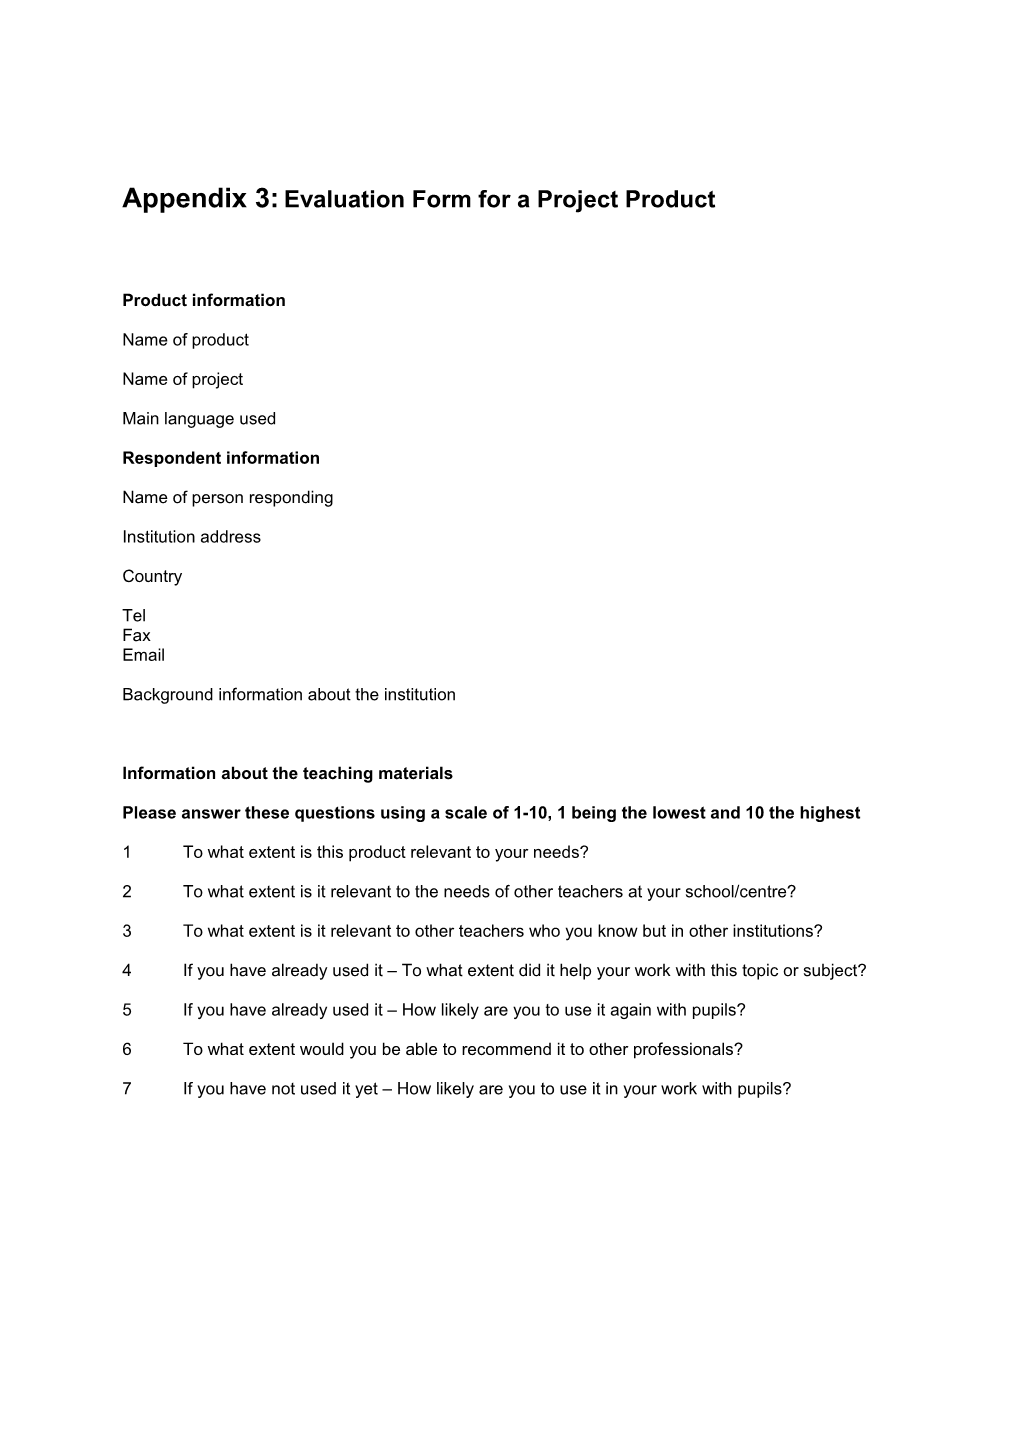 Appendix 3: Evaluation Form for a Project Product